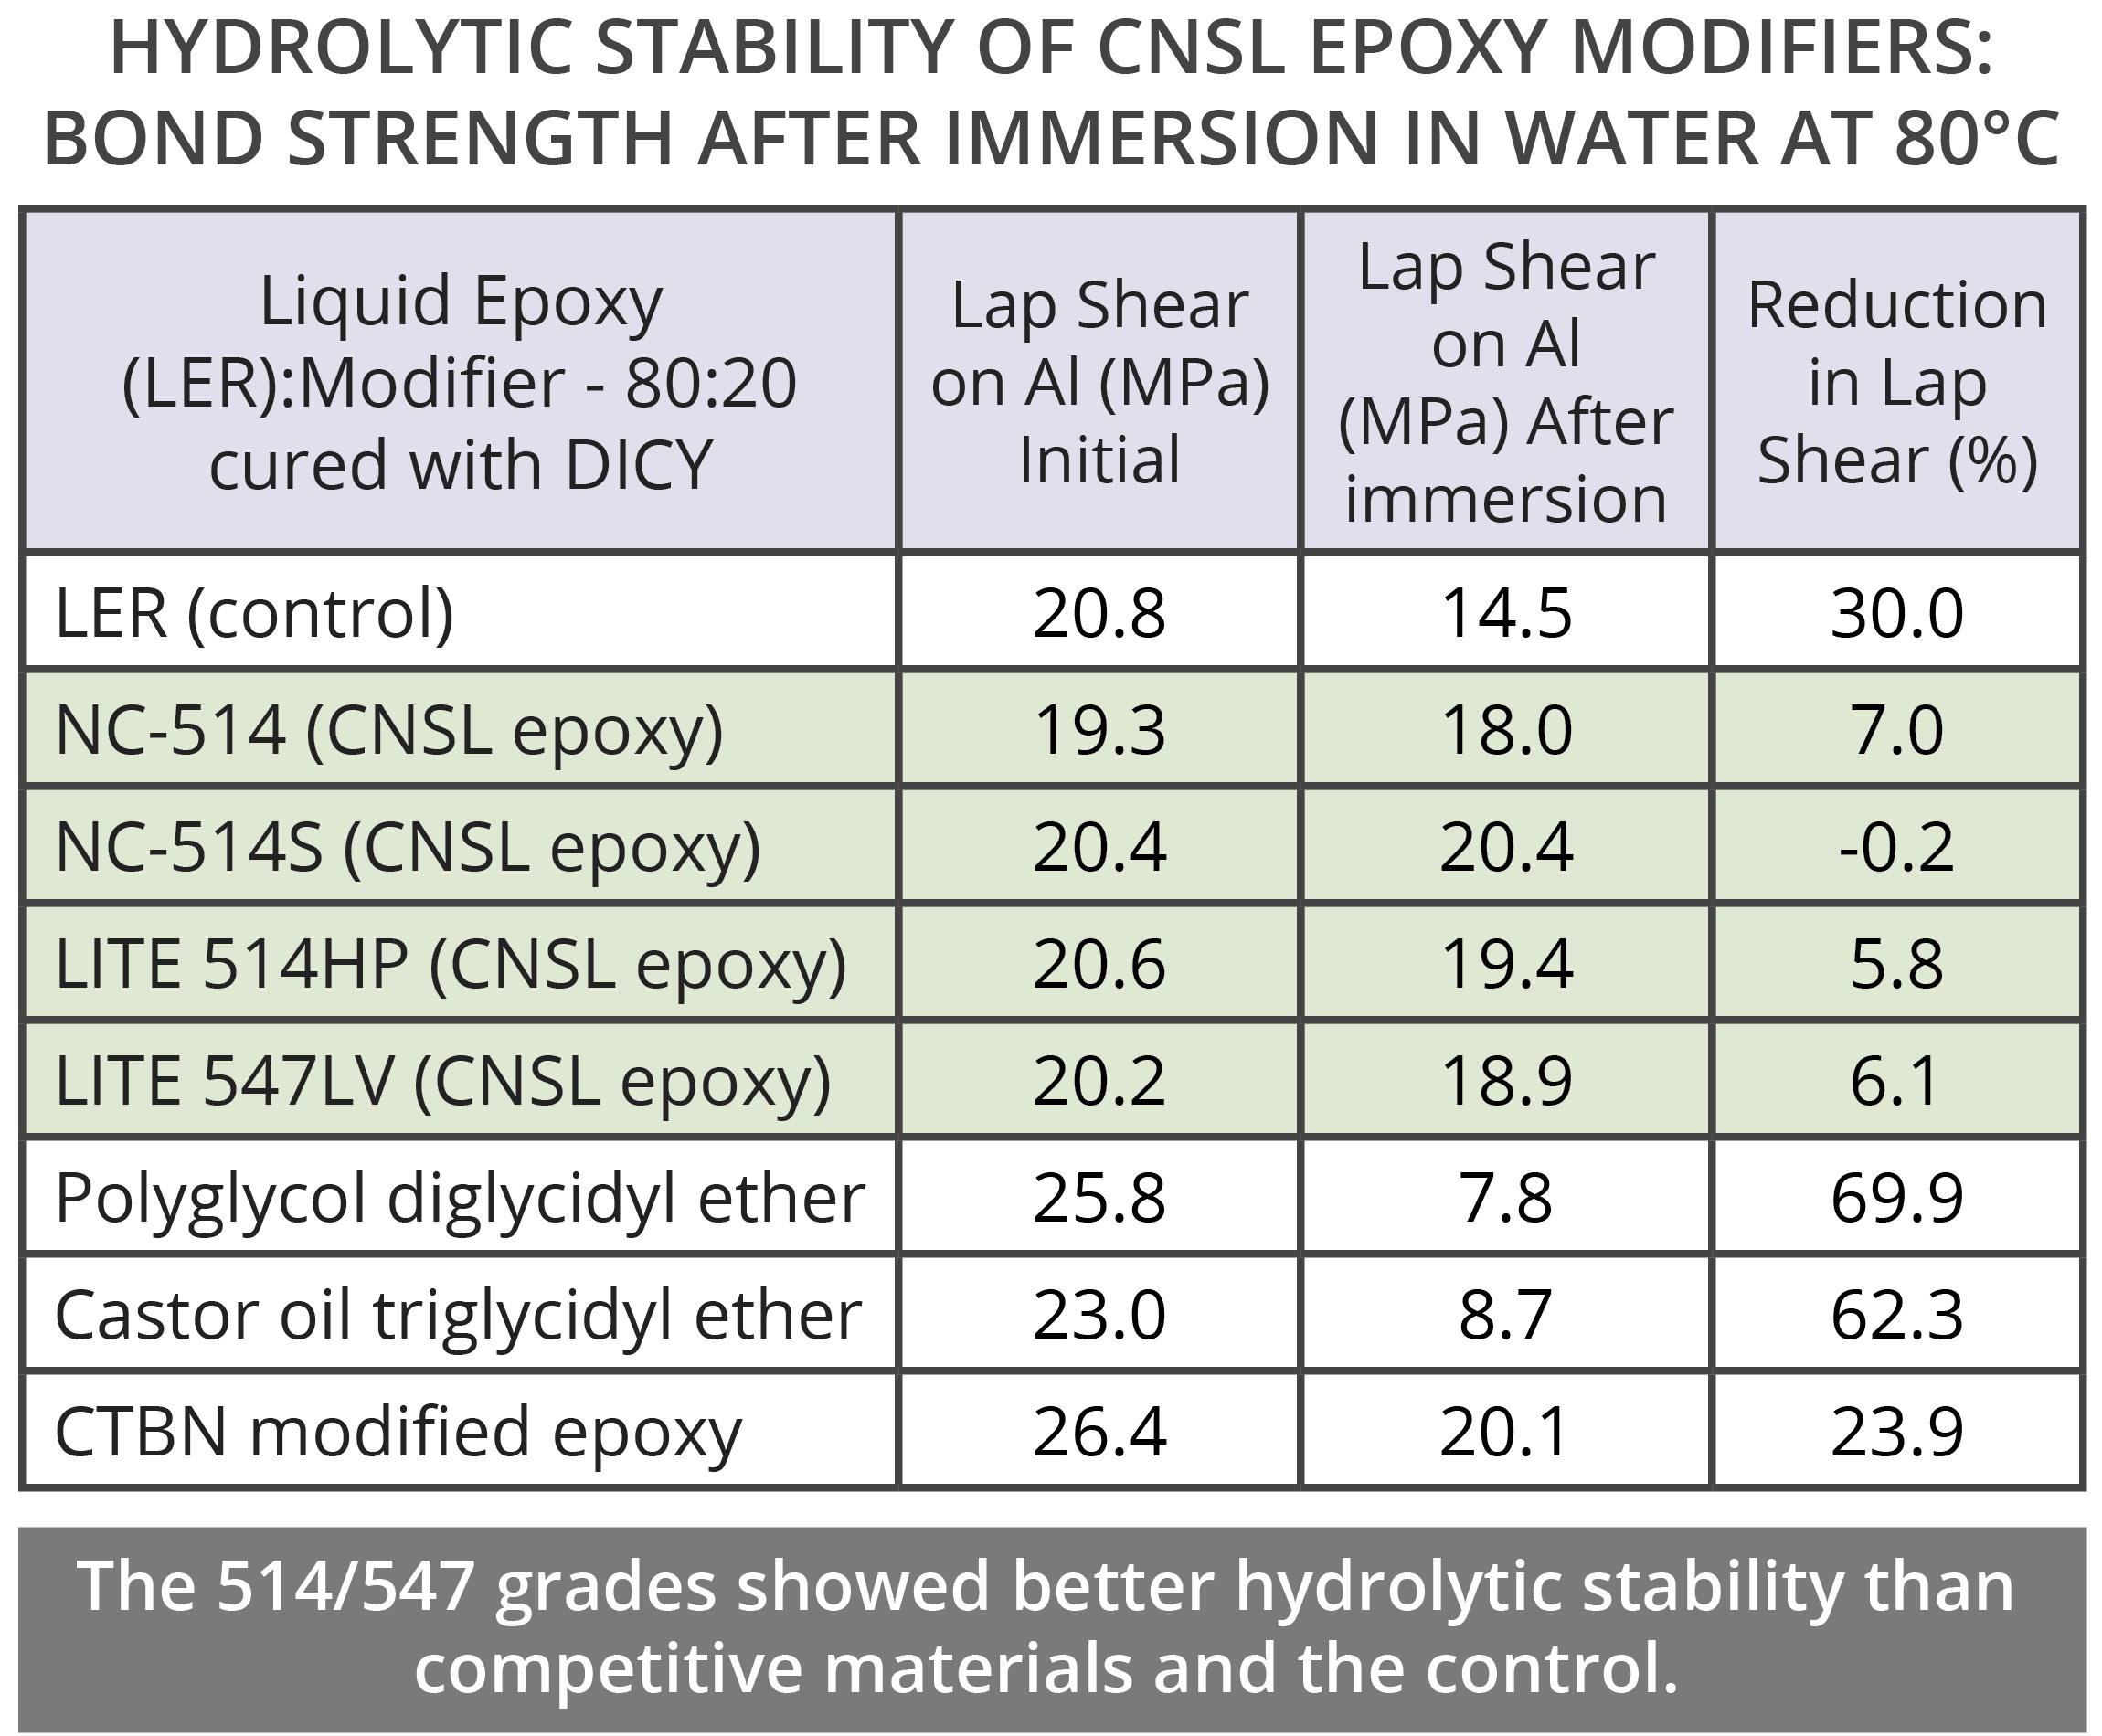 CNSL epoxy modifiers provide better hydrolytic stability